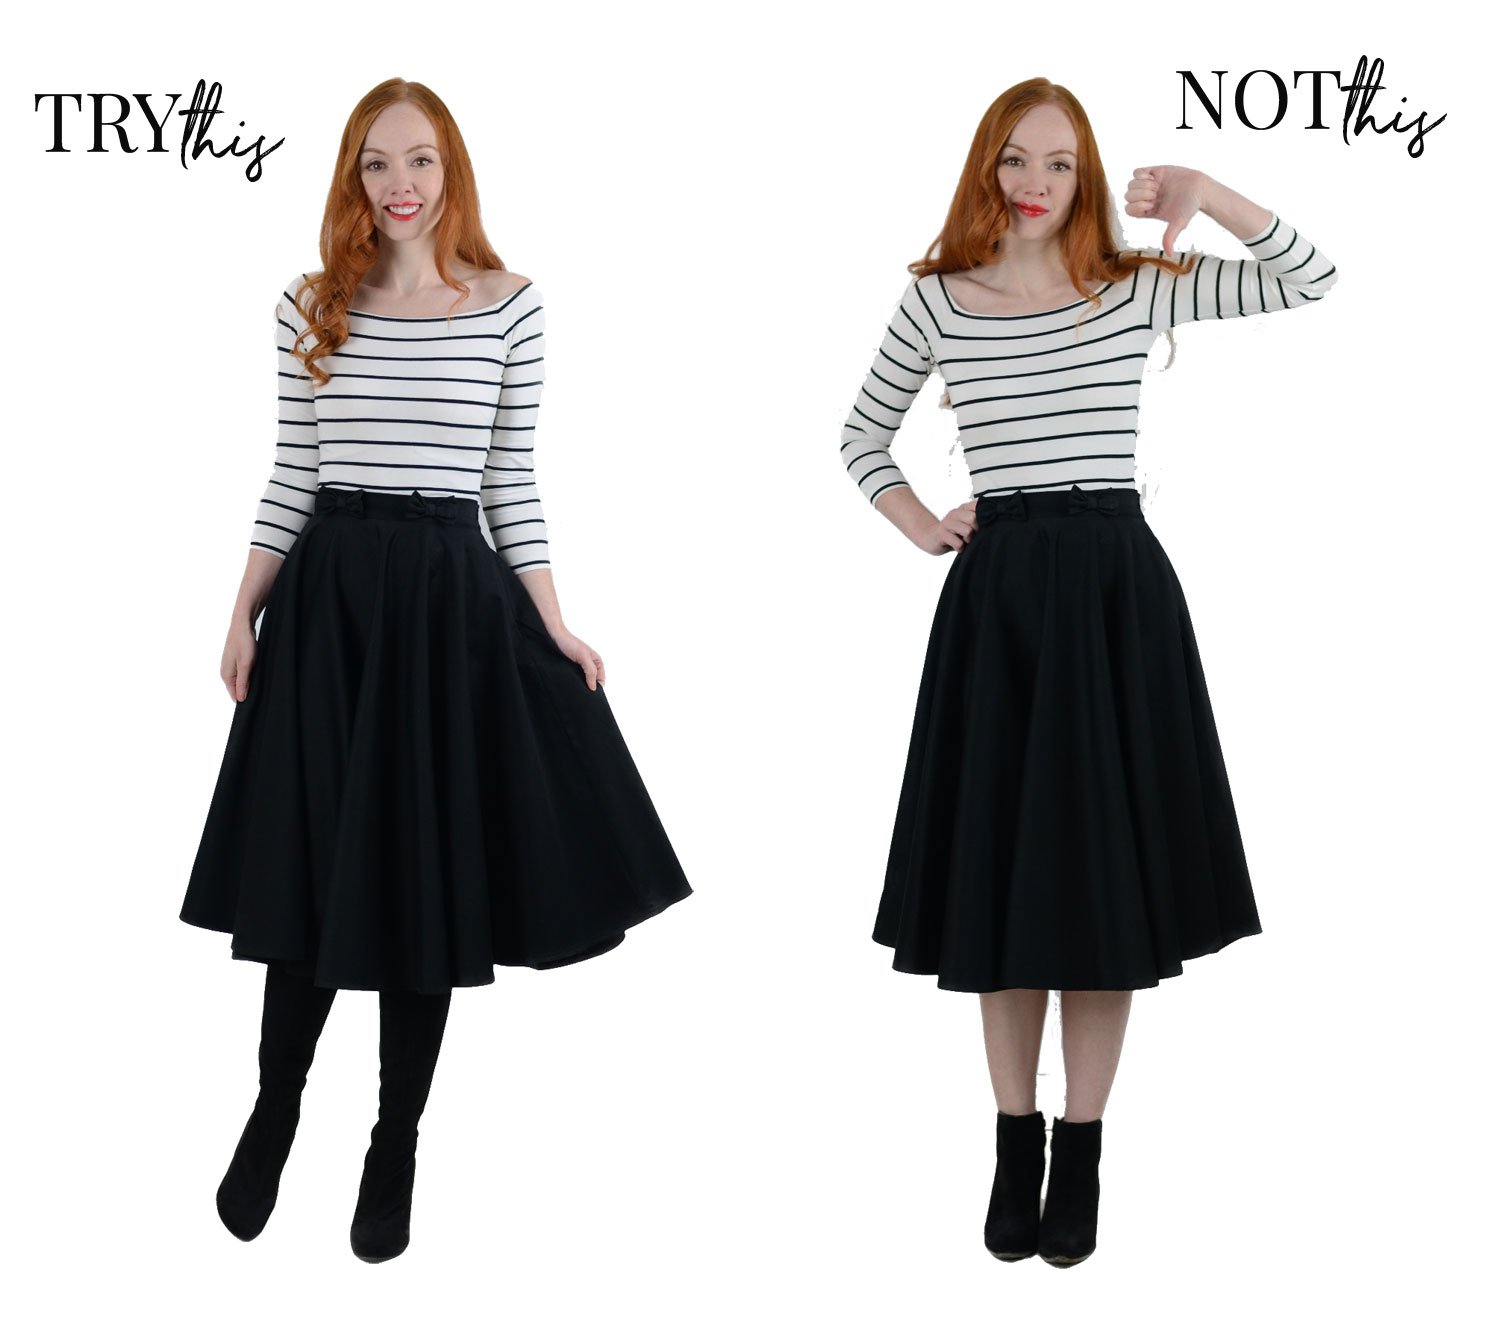 what kind of boots should you wear with a midi skirt